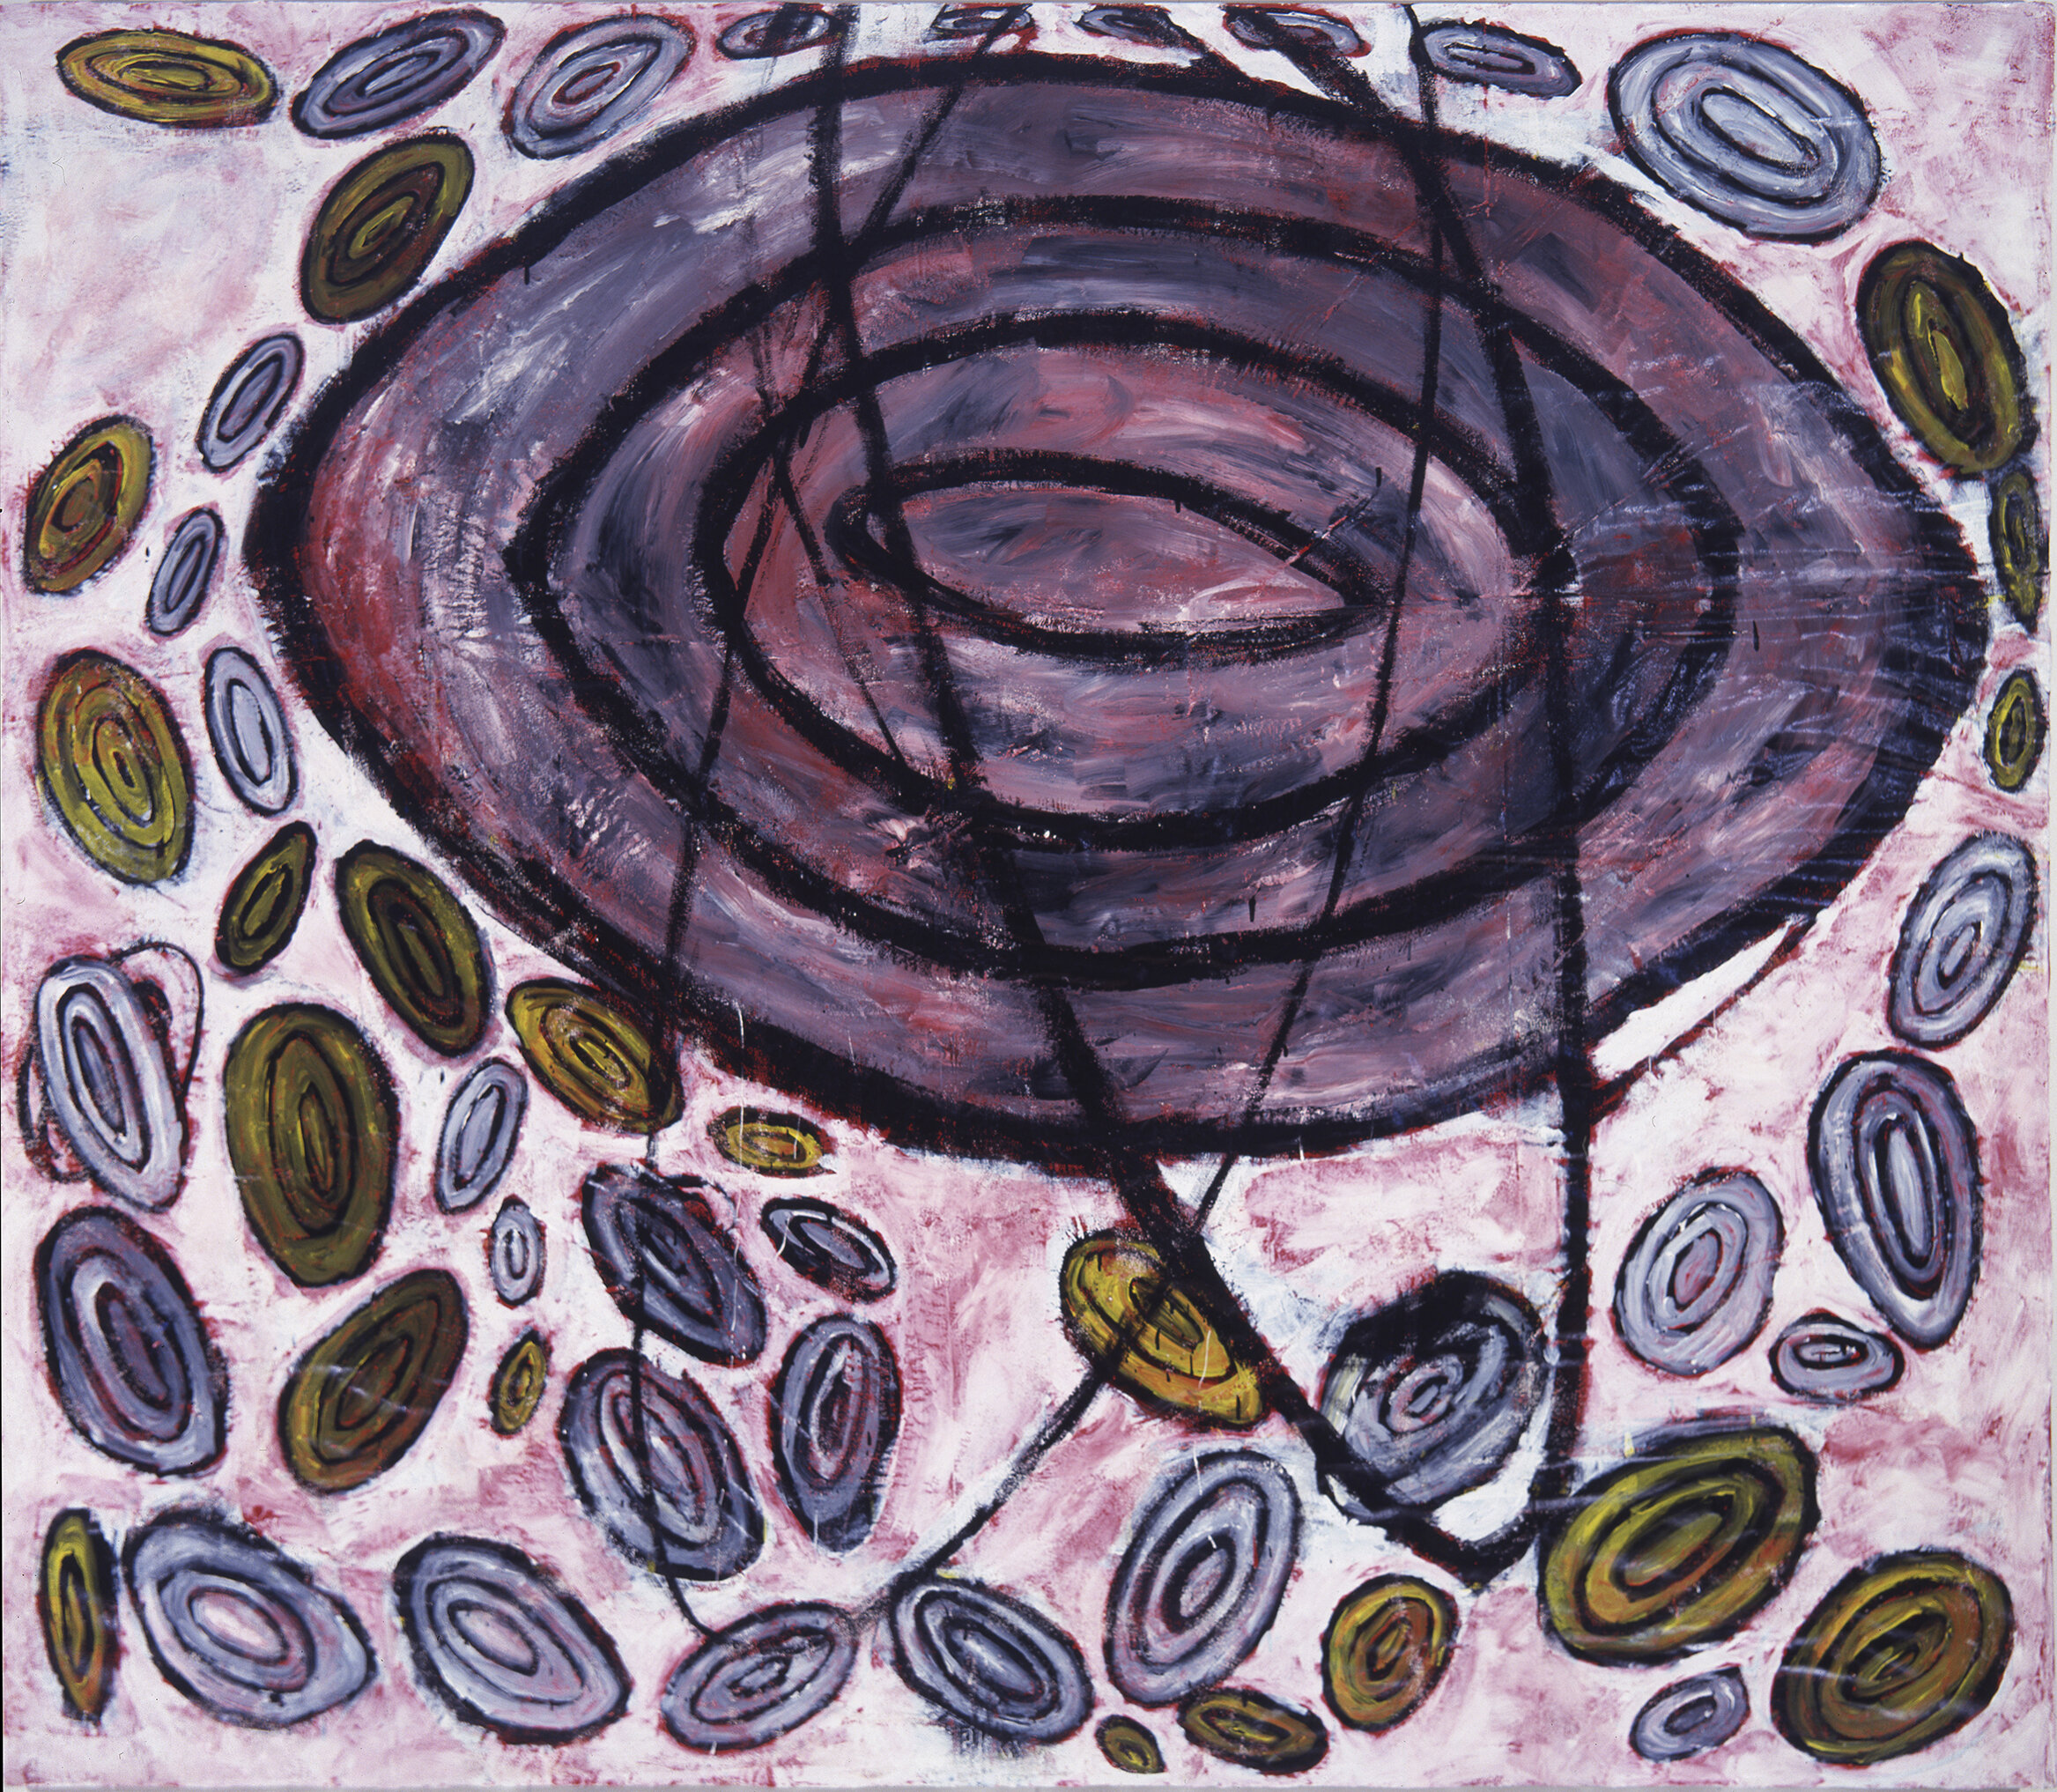   Heavenly Bodies Surrounded by Notables , 1983, acrylic, latex enamel, gauze, on canvas, 72 x 84 inches. Exhibited Southeastern Center for Contemporary Art, Winston-Salem, North Carolina  copy 